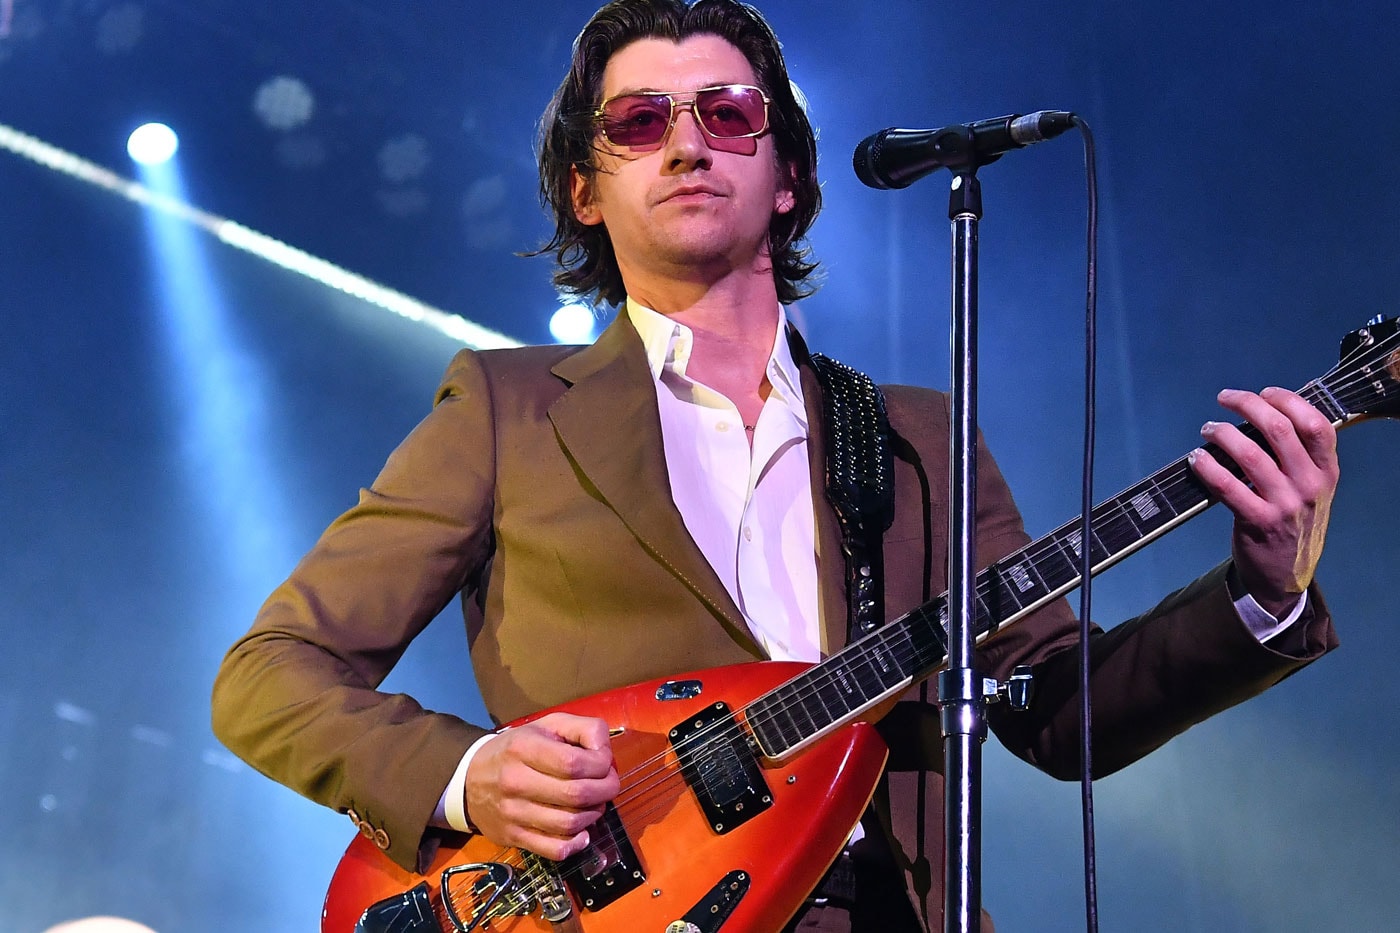 Arctic Monkeys The Car New Album Announcement tranquility base hotel and casino followup